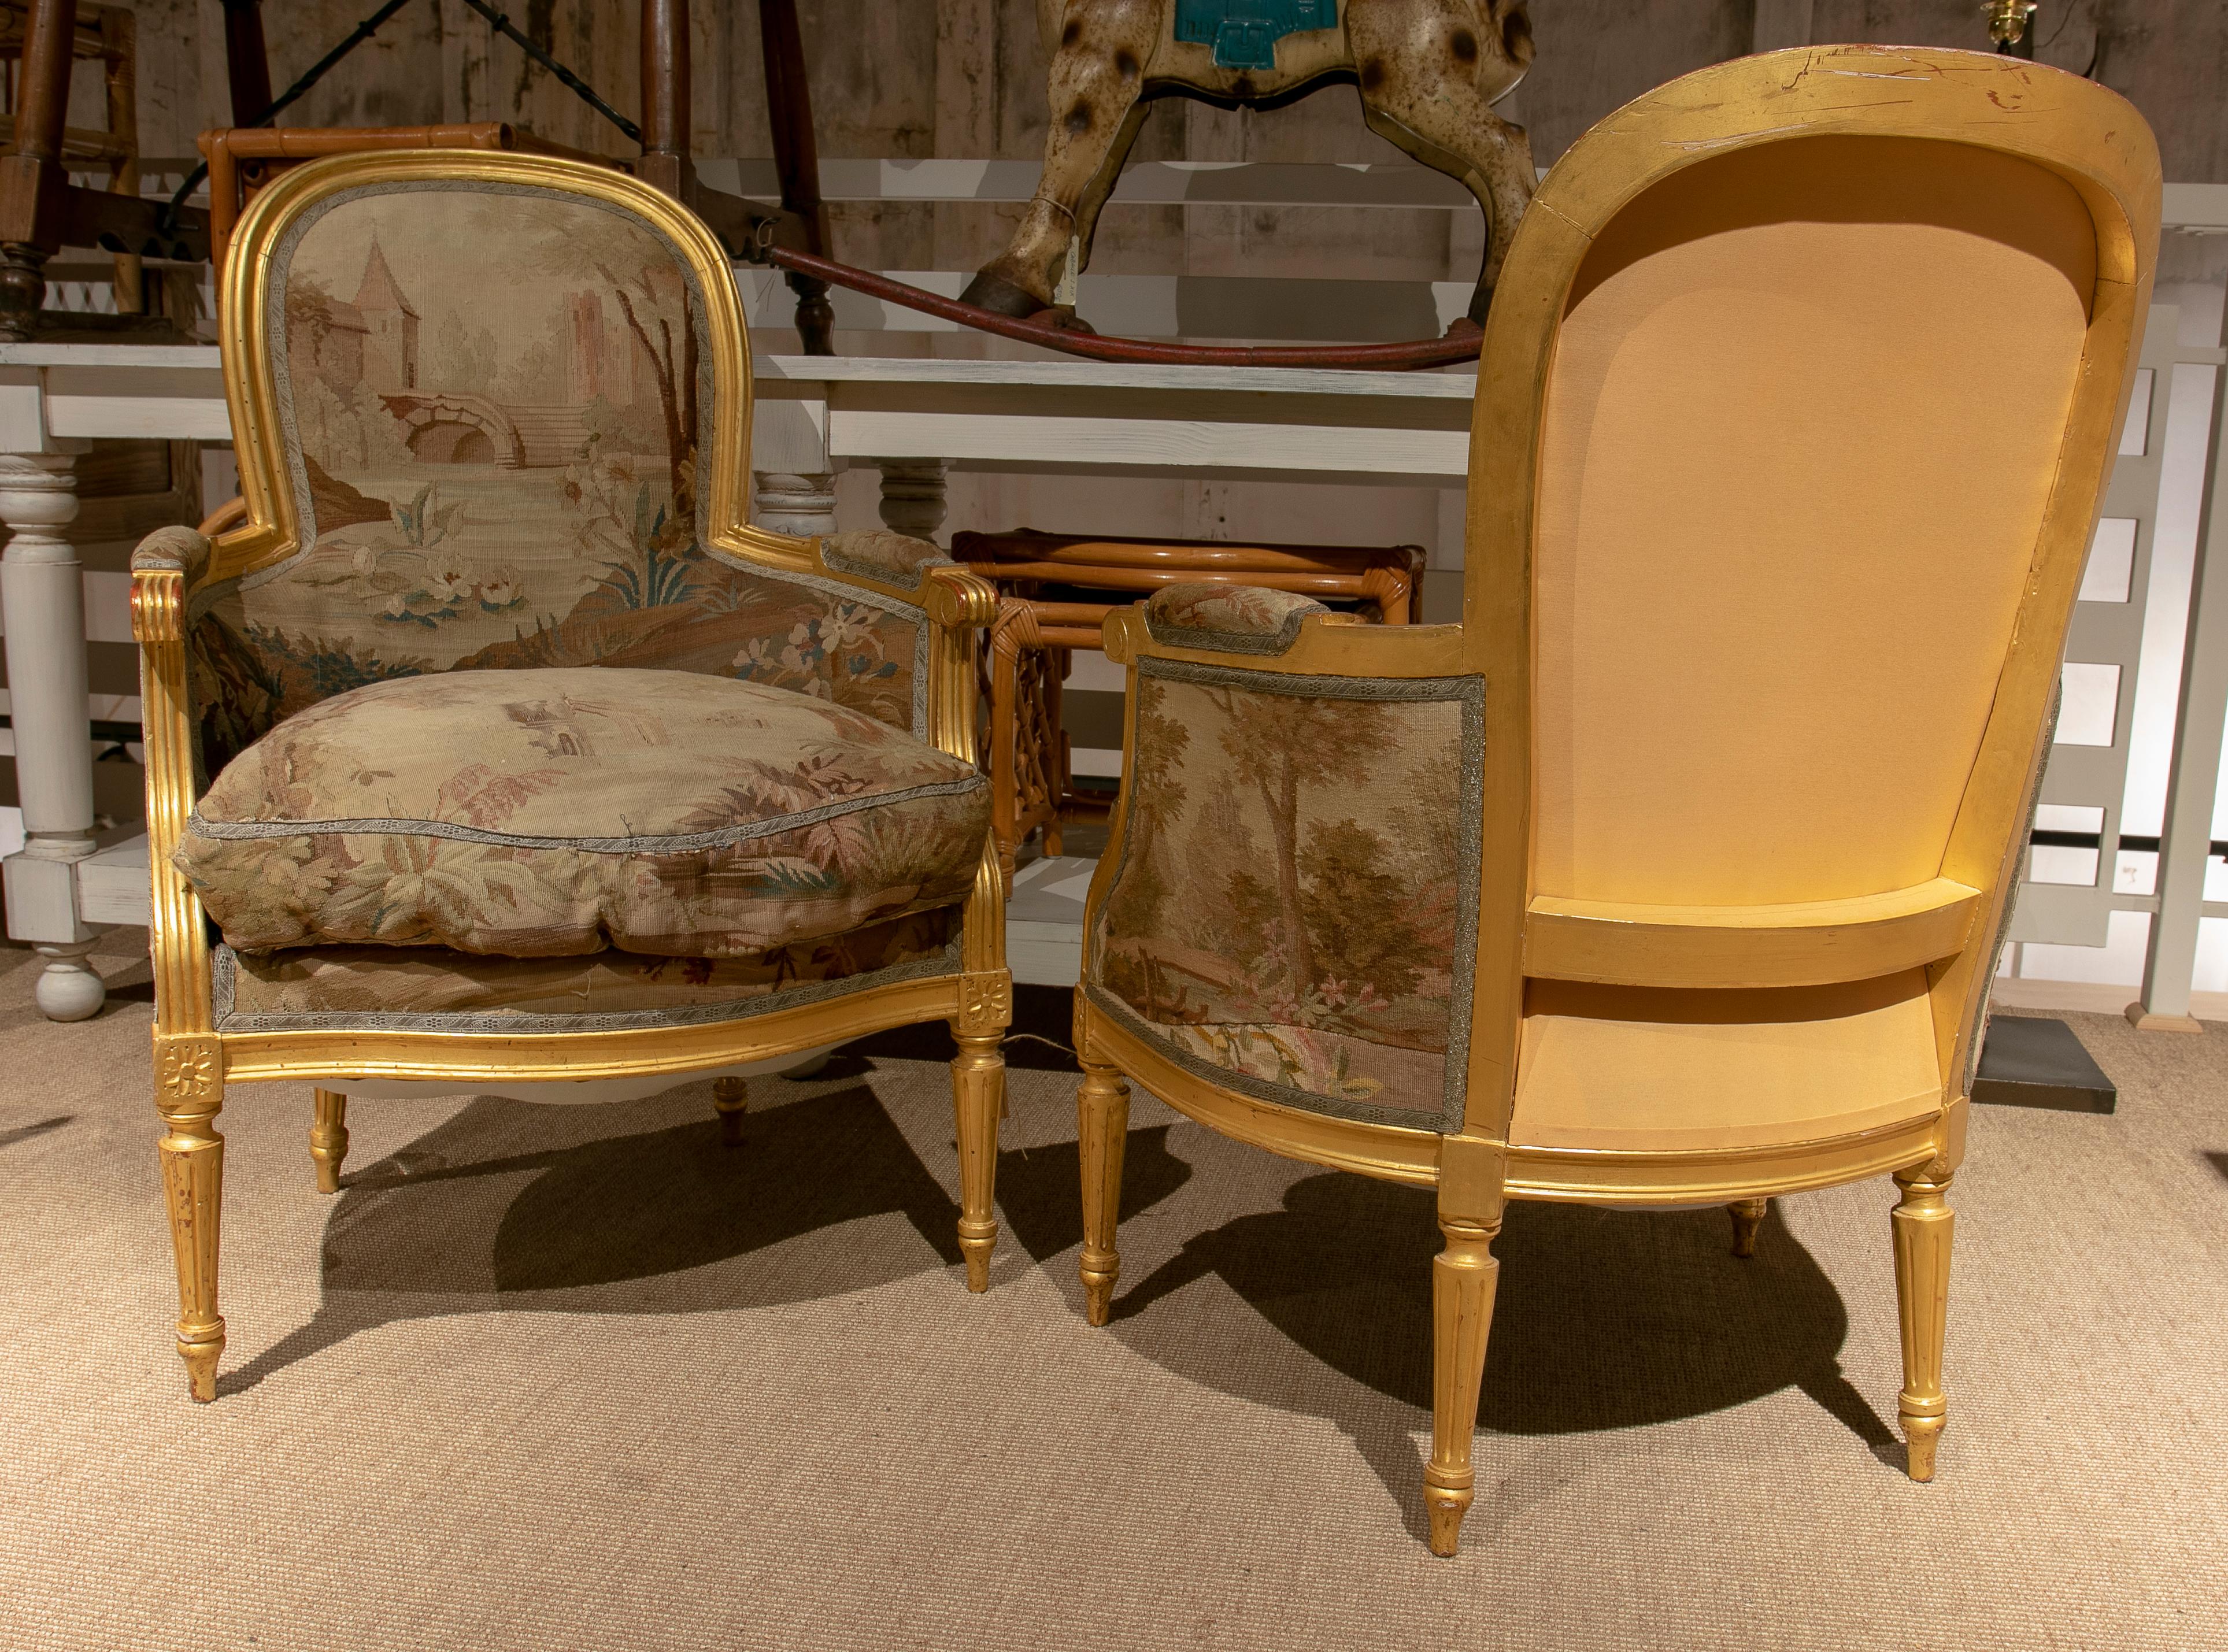 Pair of Mid-19th Century French Giltwood Armchairs W/ 18th Century Upholstery 8